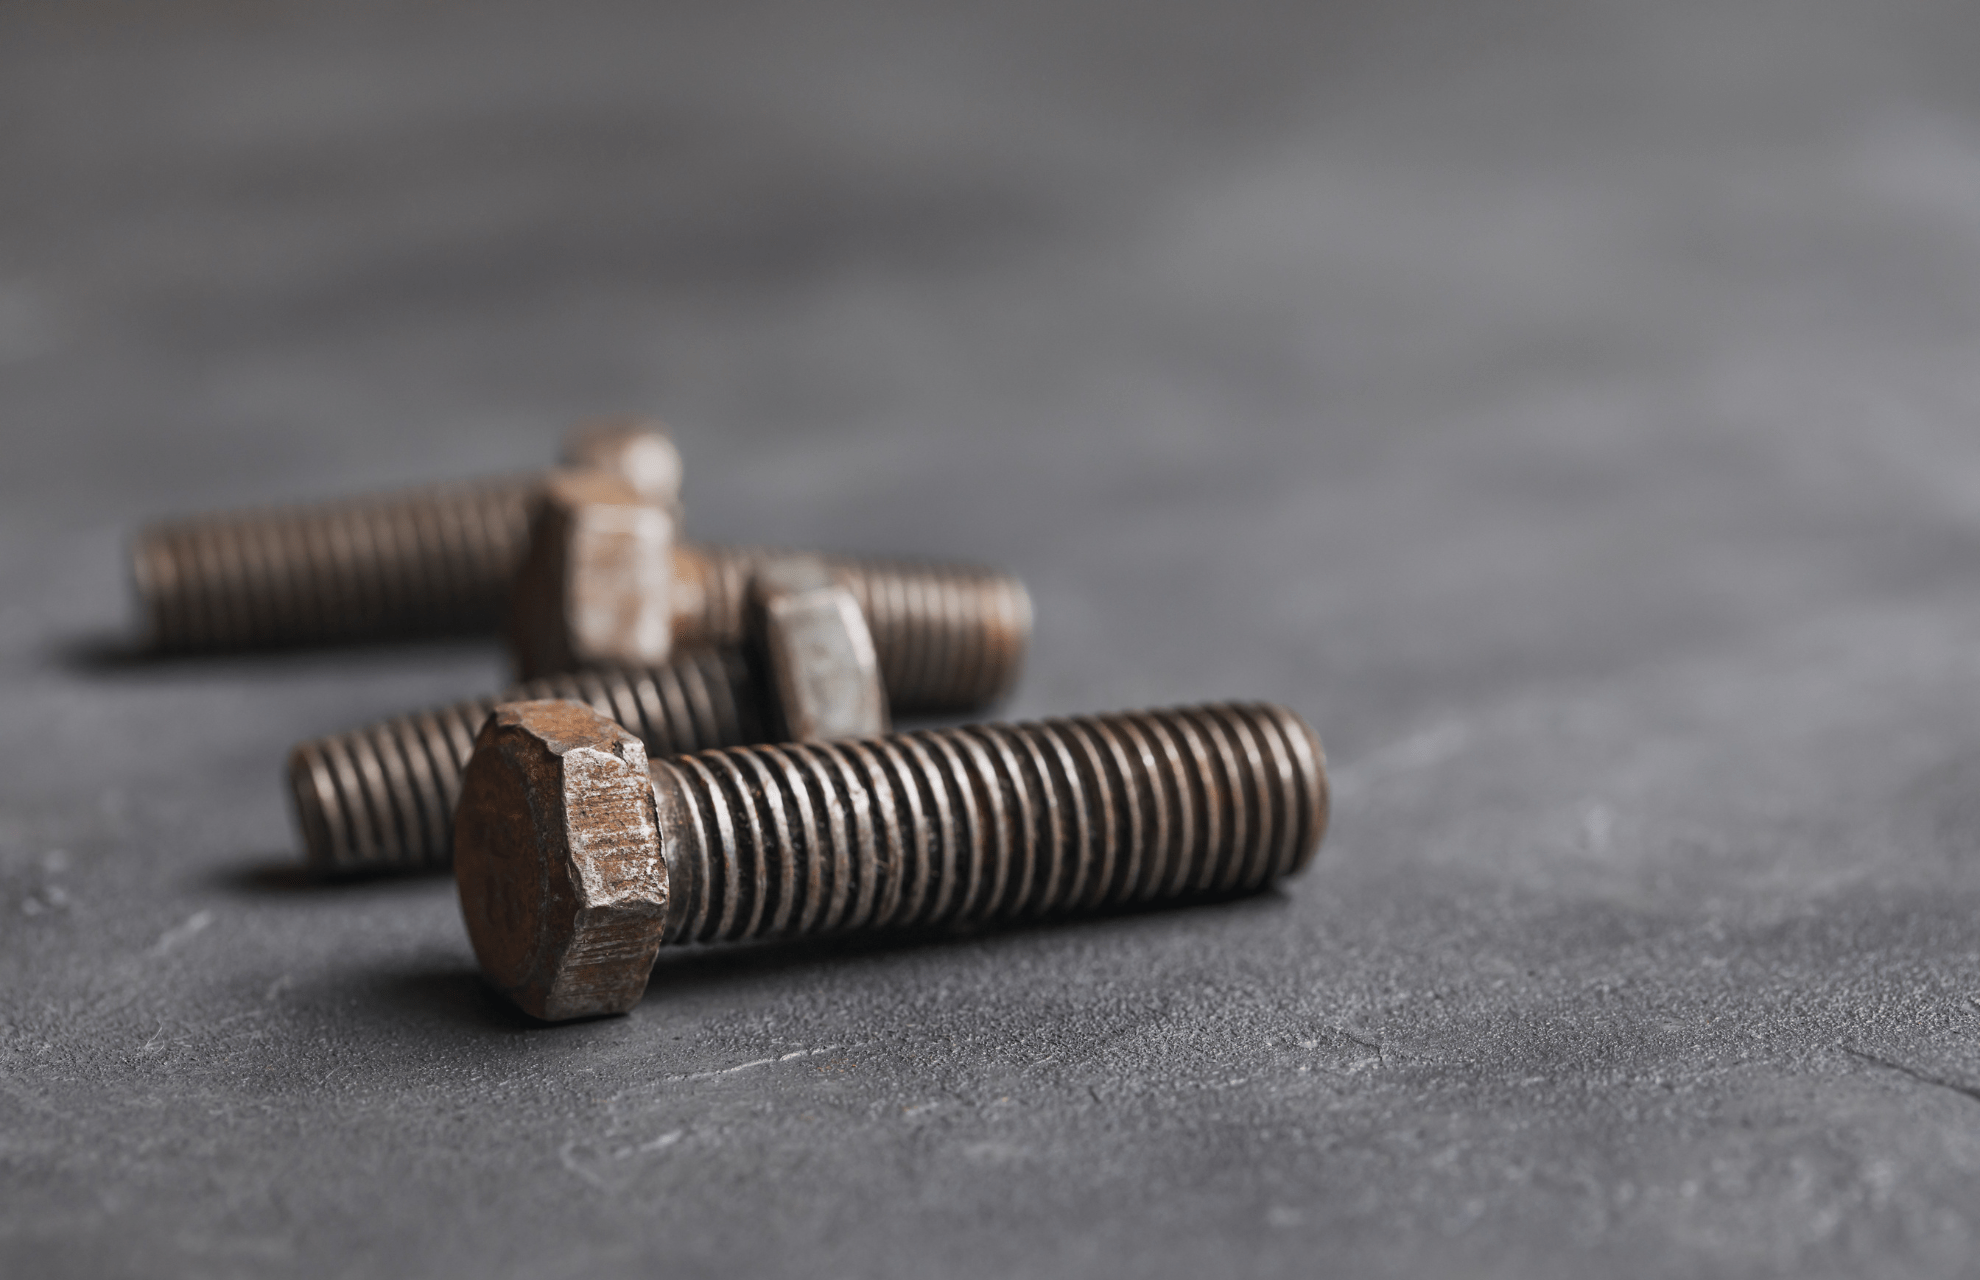 Rusty screws and bolts